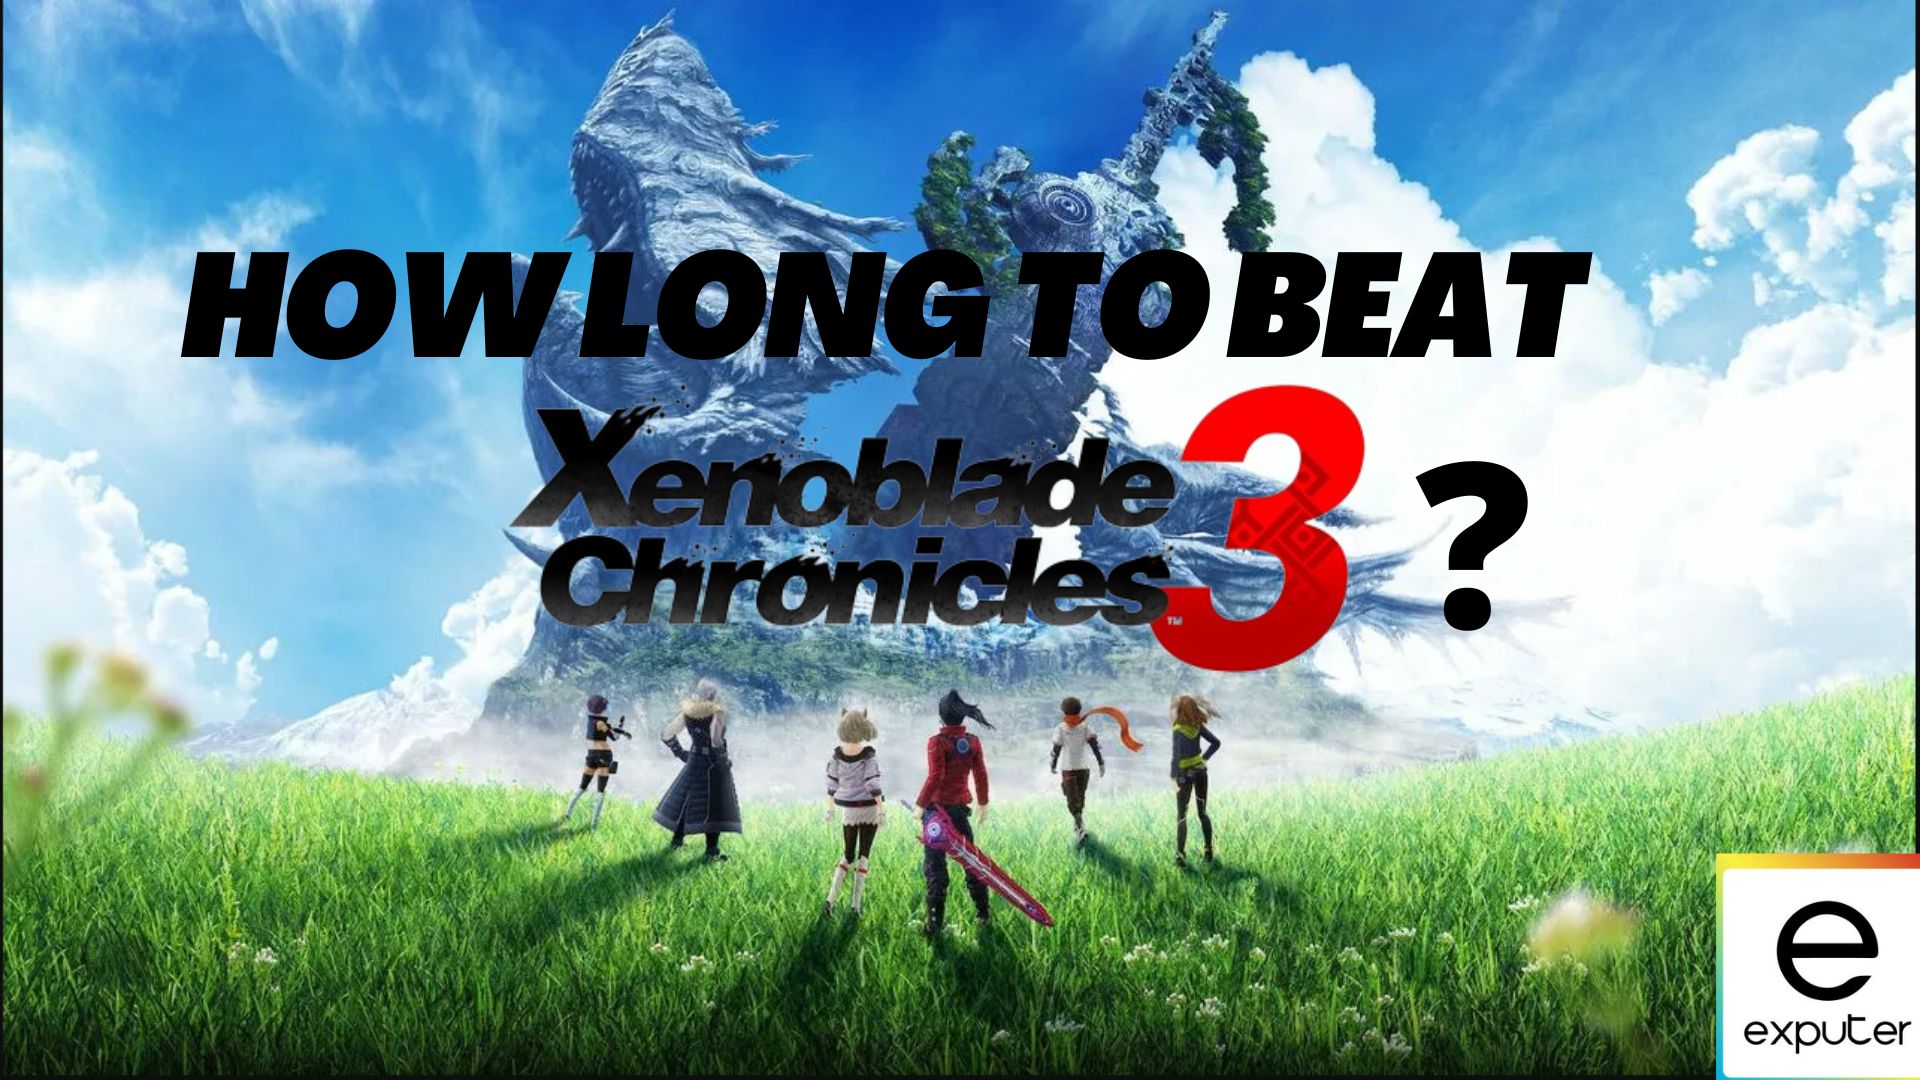 How long to beat Xenoblade Chronicles 3?